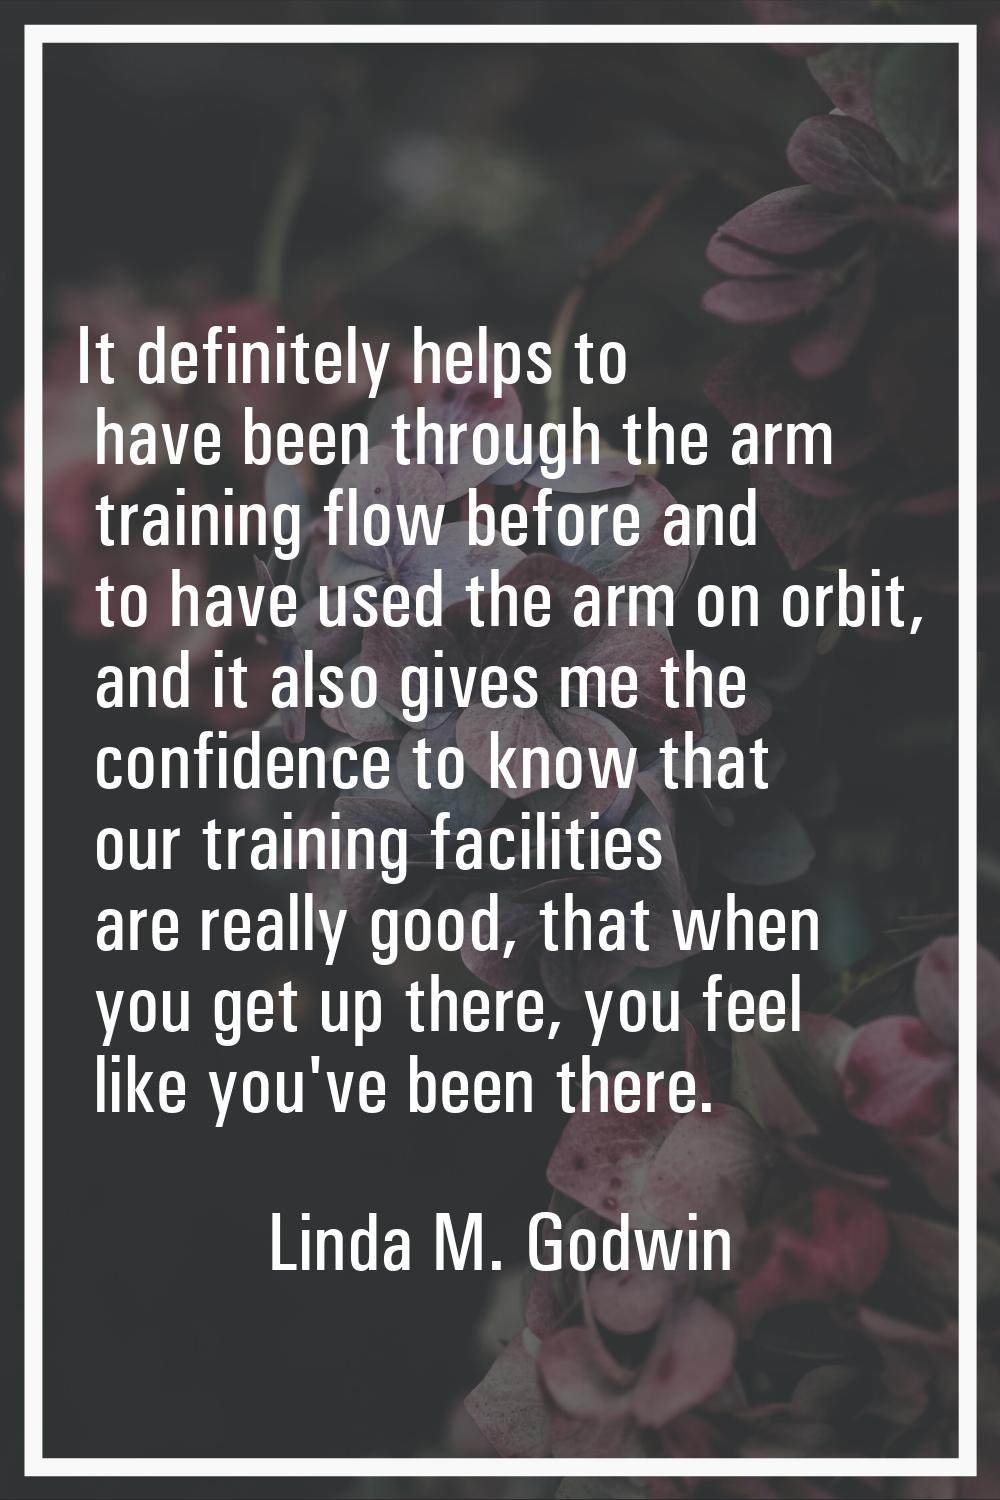 It definitely helps to have been through the arm training flow before and to have used the arm on o